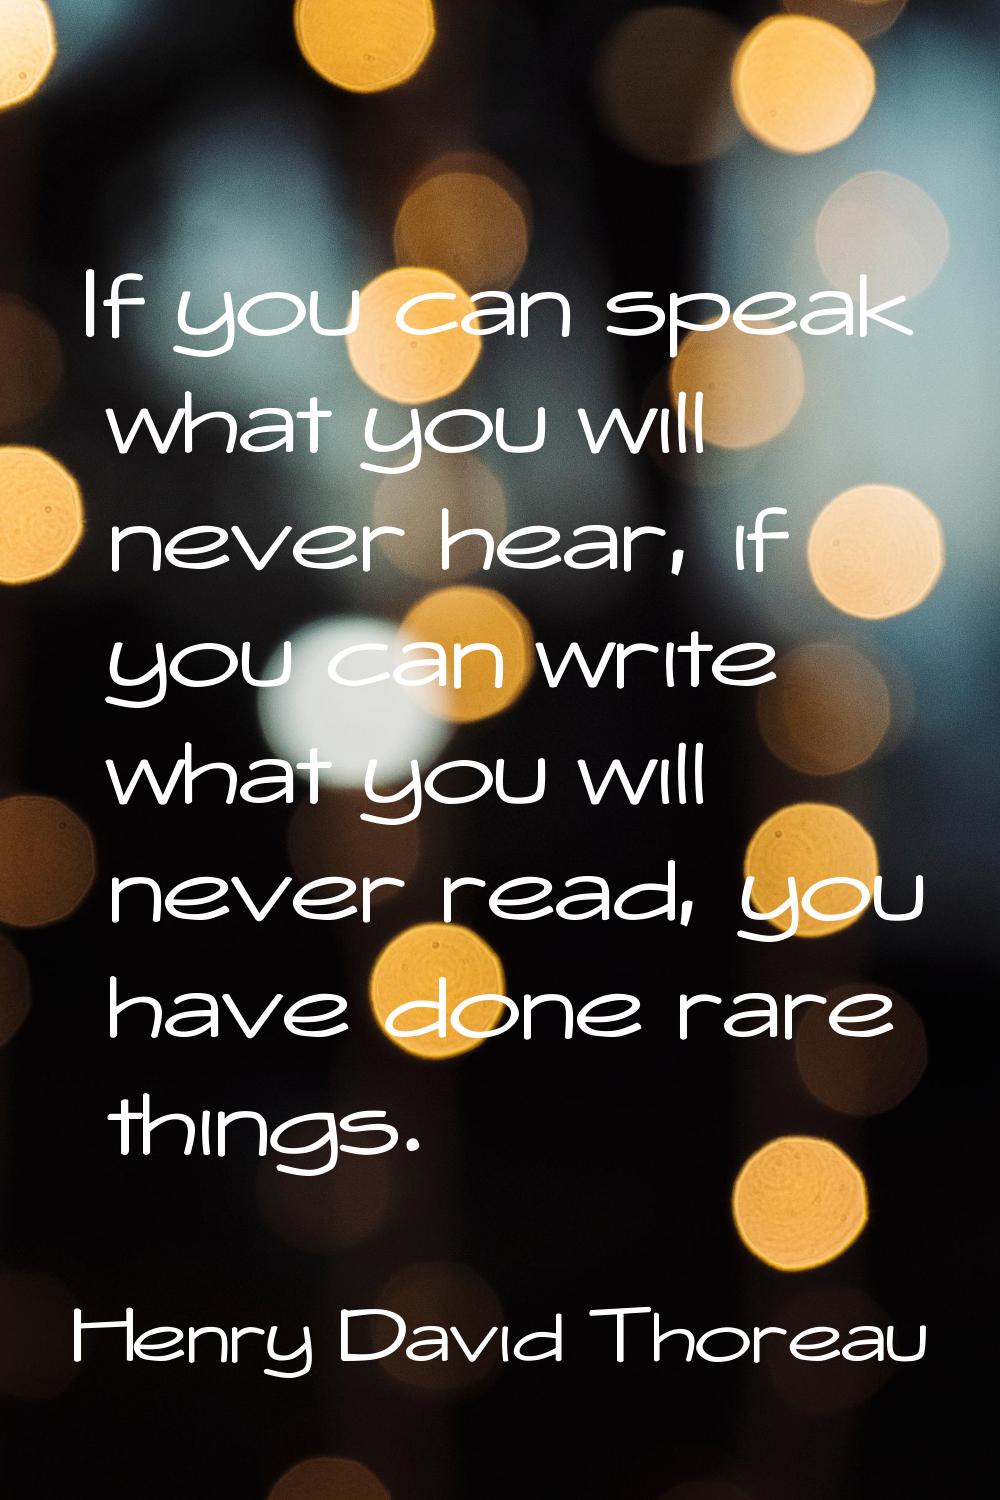 If you can speak what you will never hear, if you can write what you will never read, you have done